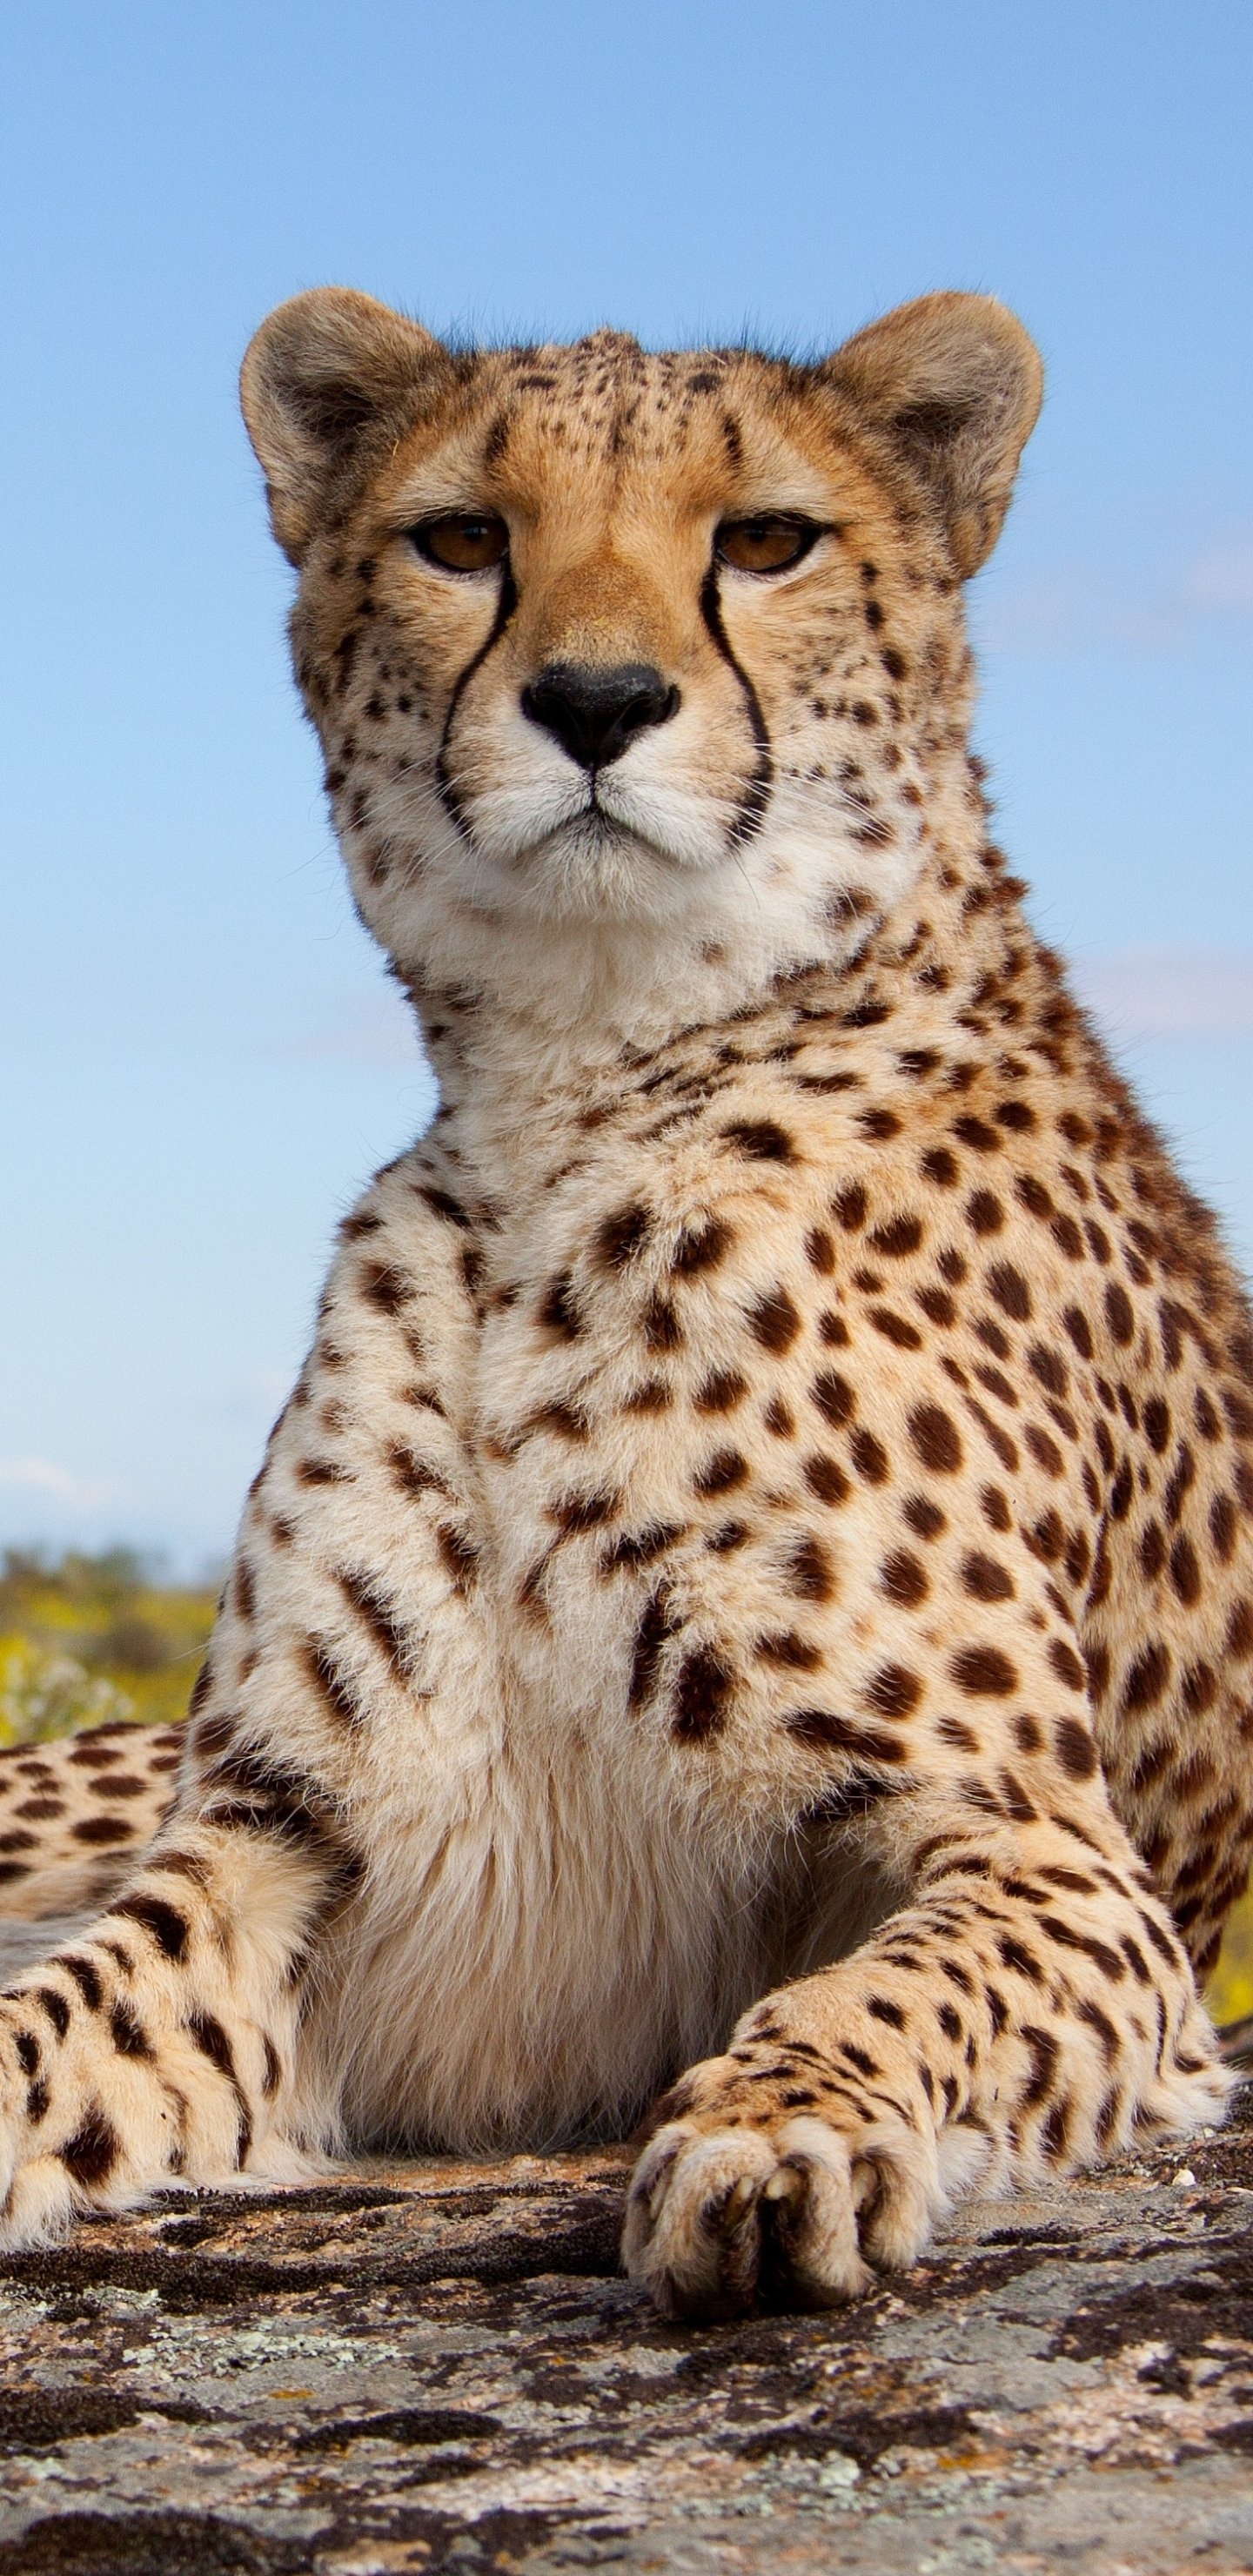 Magnificent animal cheetah, Grace and agility, Captivating predator, Nature's masterpiece, 1440x2960 HD Handy